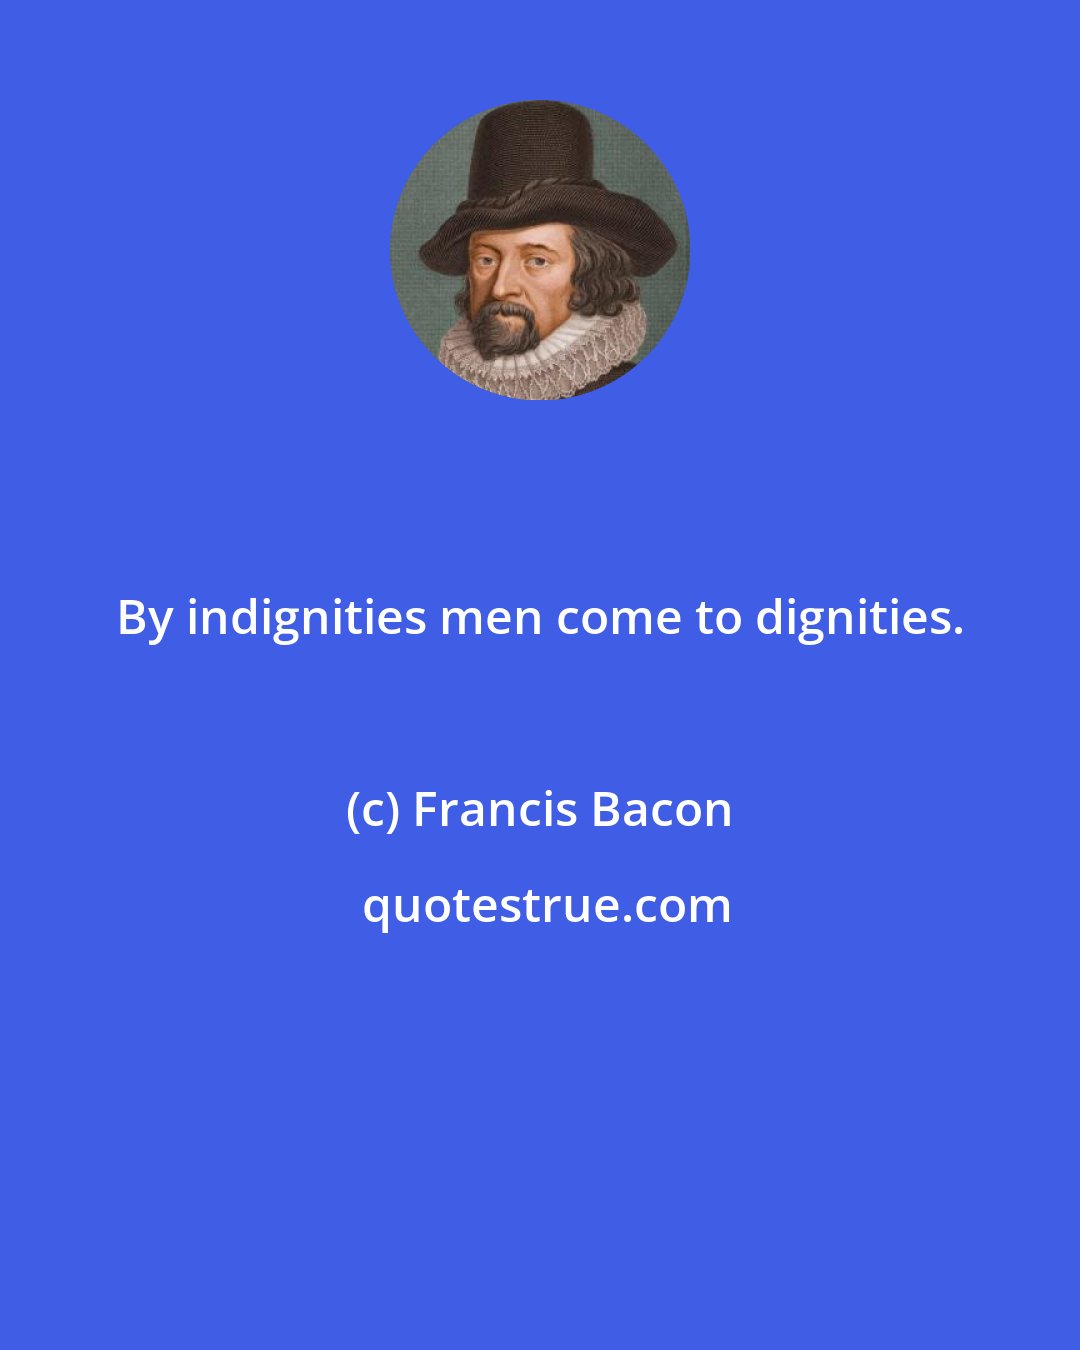 Francis Bacon: By indignities men come to dignities.